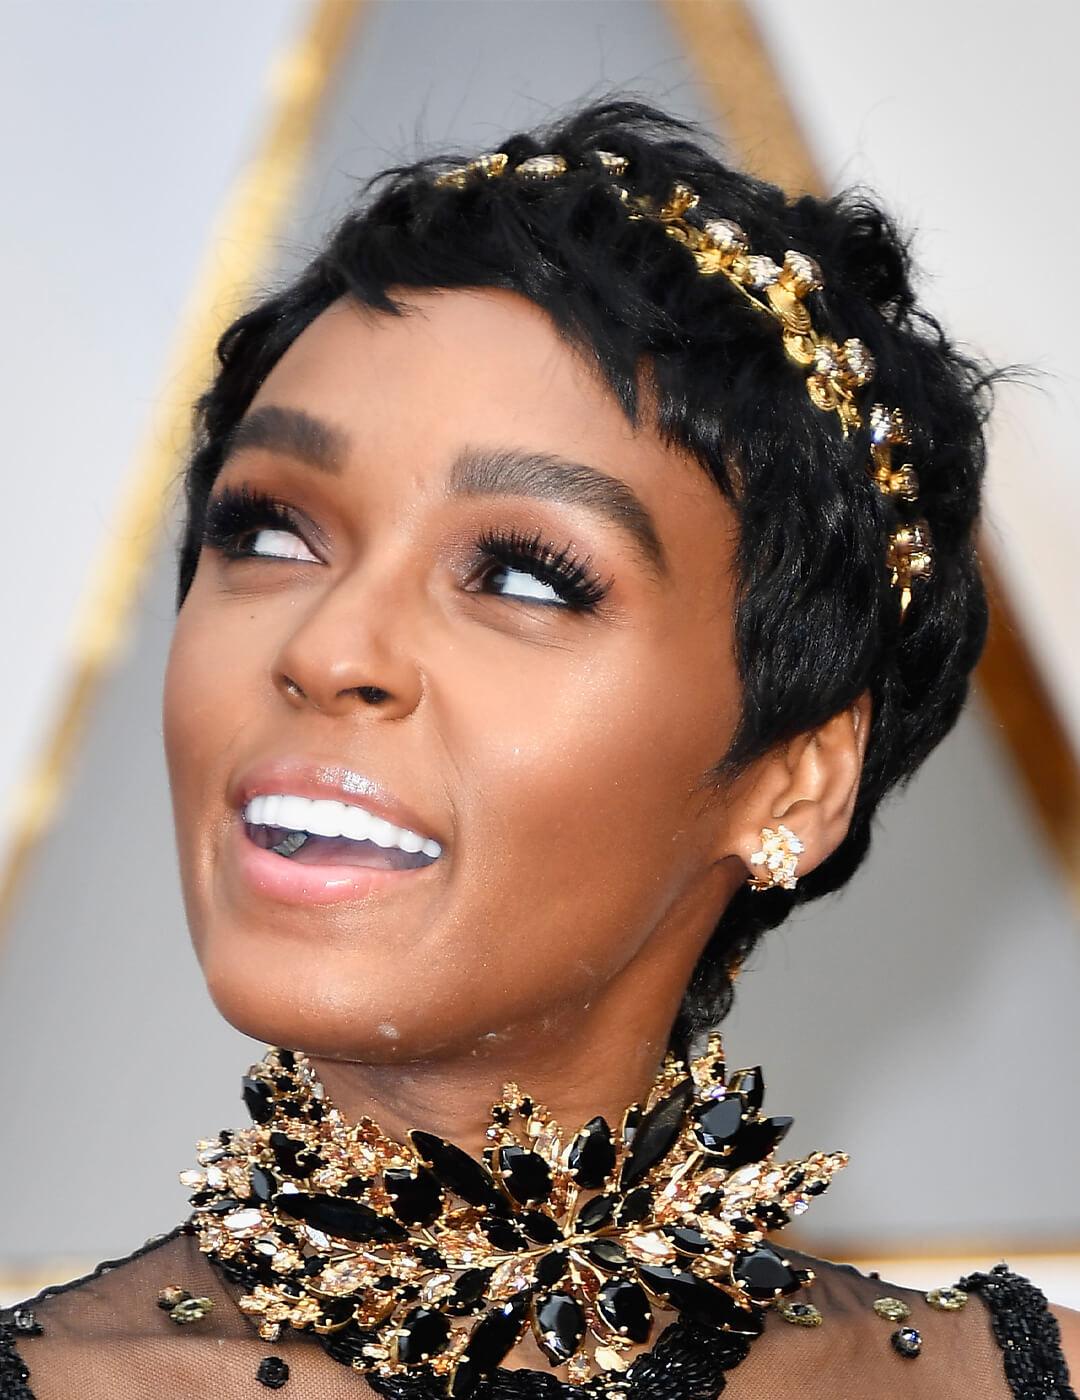 Close-up of Janelle Monae smiling while rocking a neutral makeup look, pixie cut hairstyle accented with gold and silver headband, and black and gold choker necklace